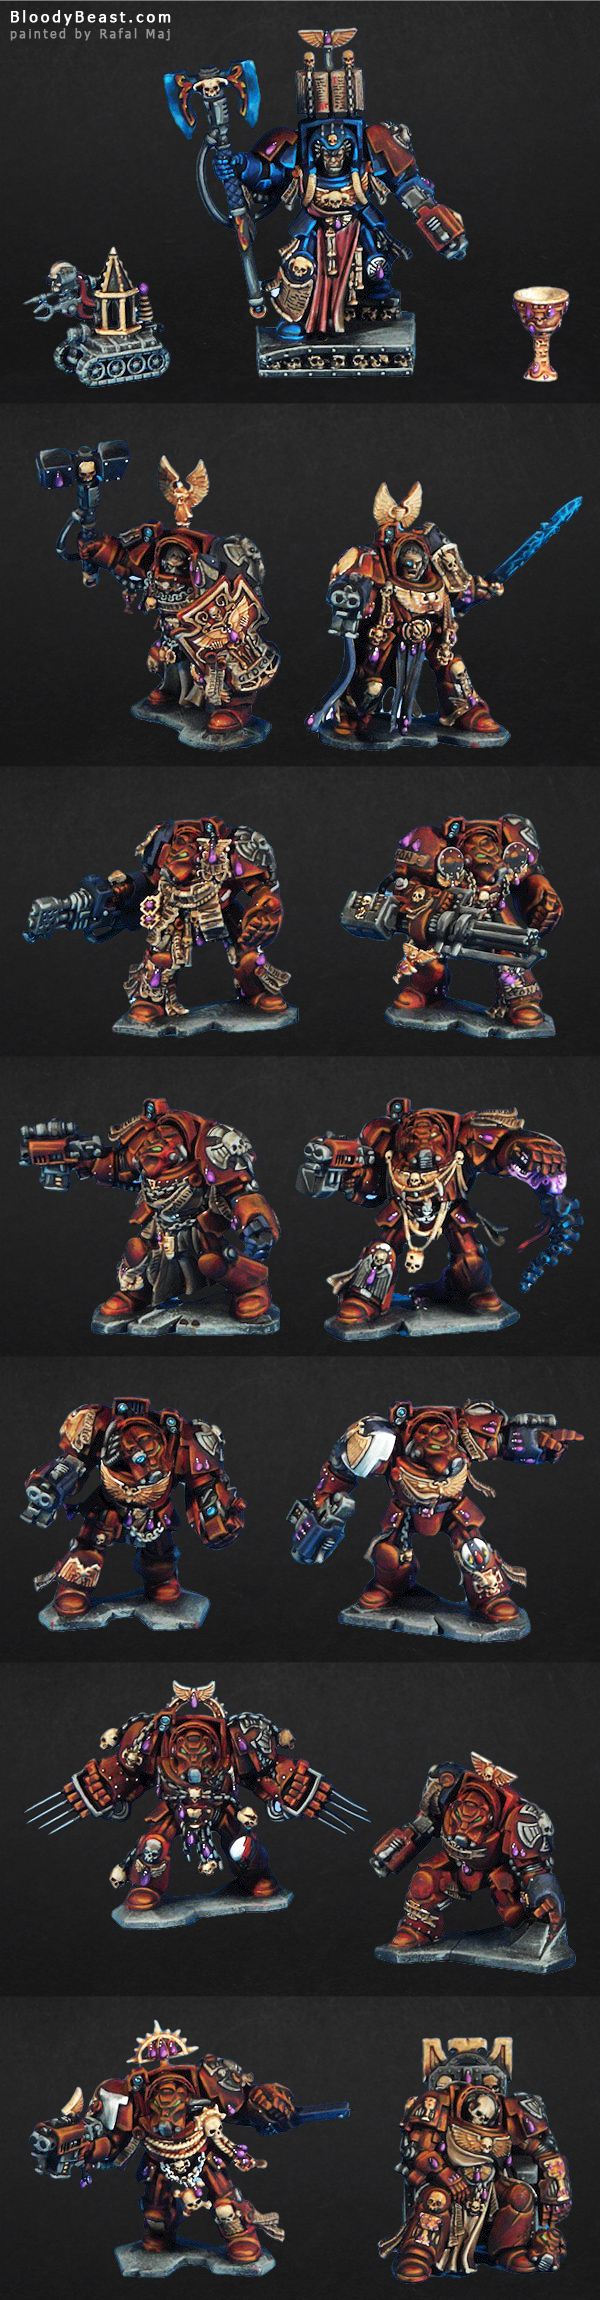 Another Space Hulk 3rd Edition Terminators painted by Rafal Maj (BloodyBeast.com)